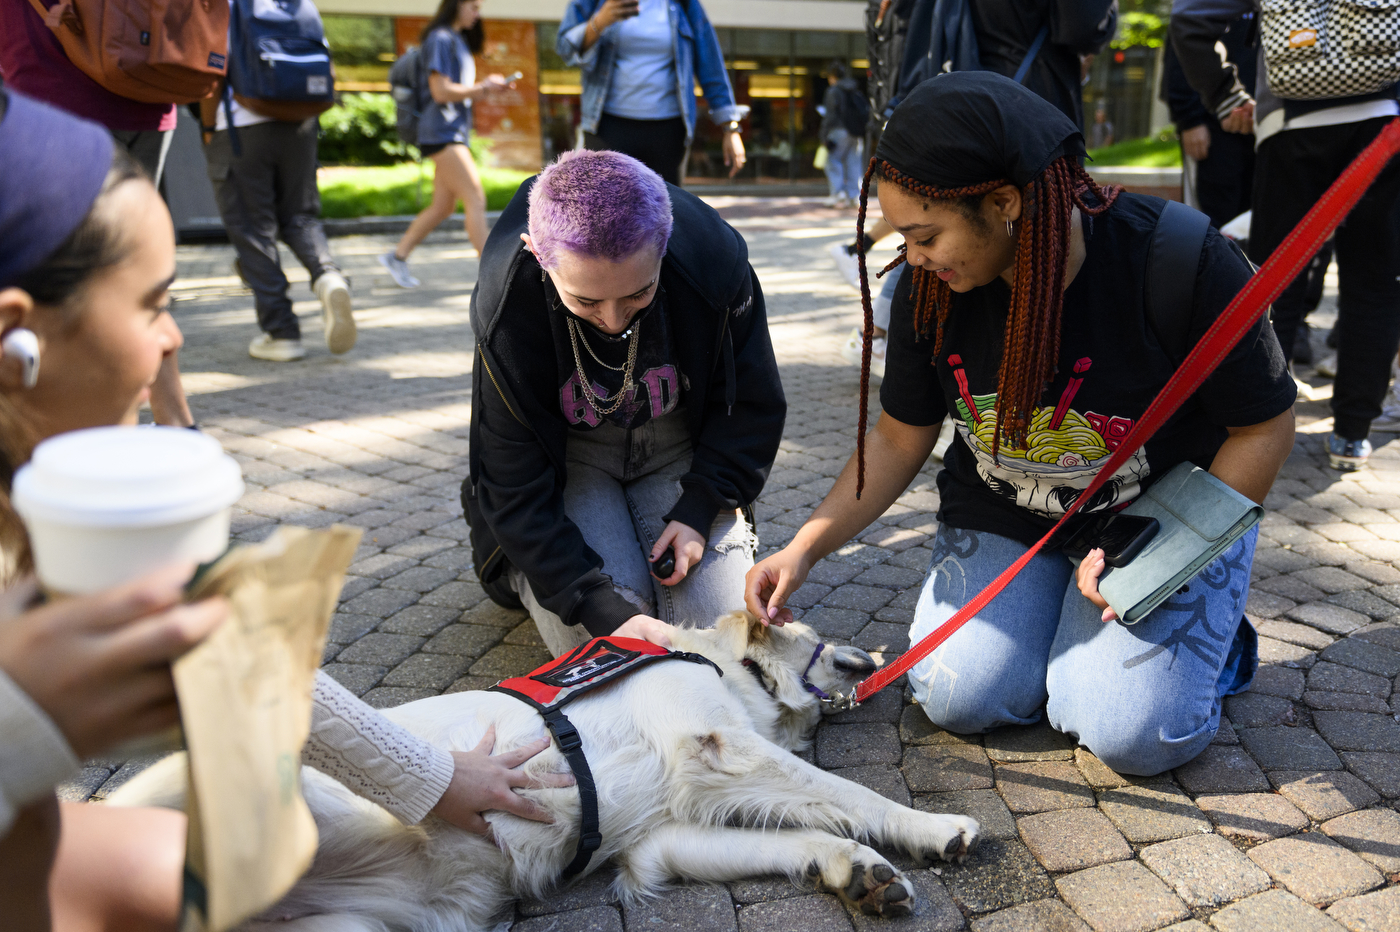 A group of people are petting service dogs at Northeastern.